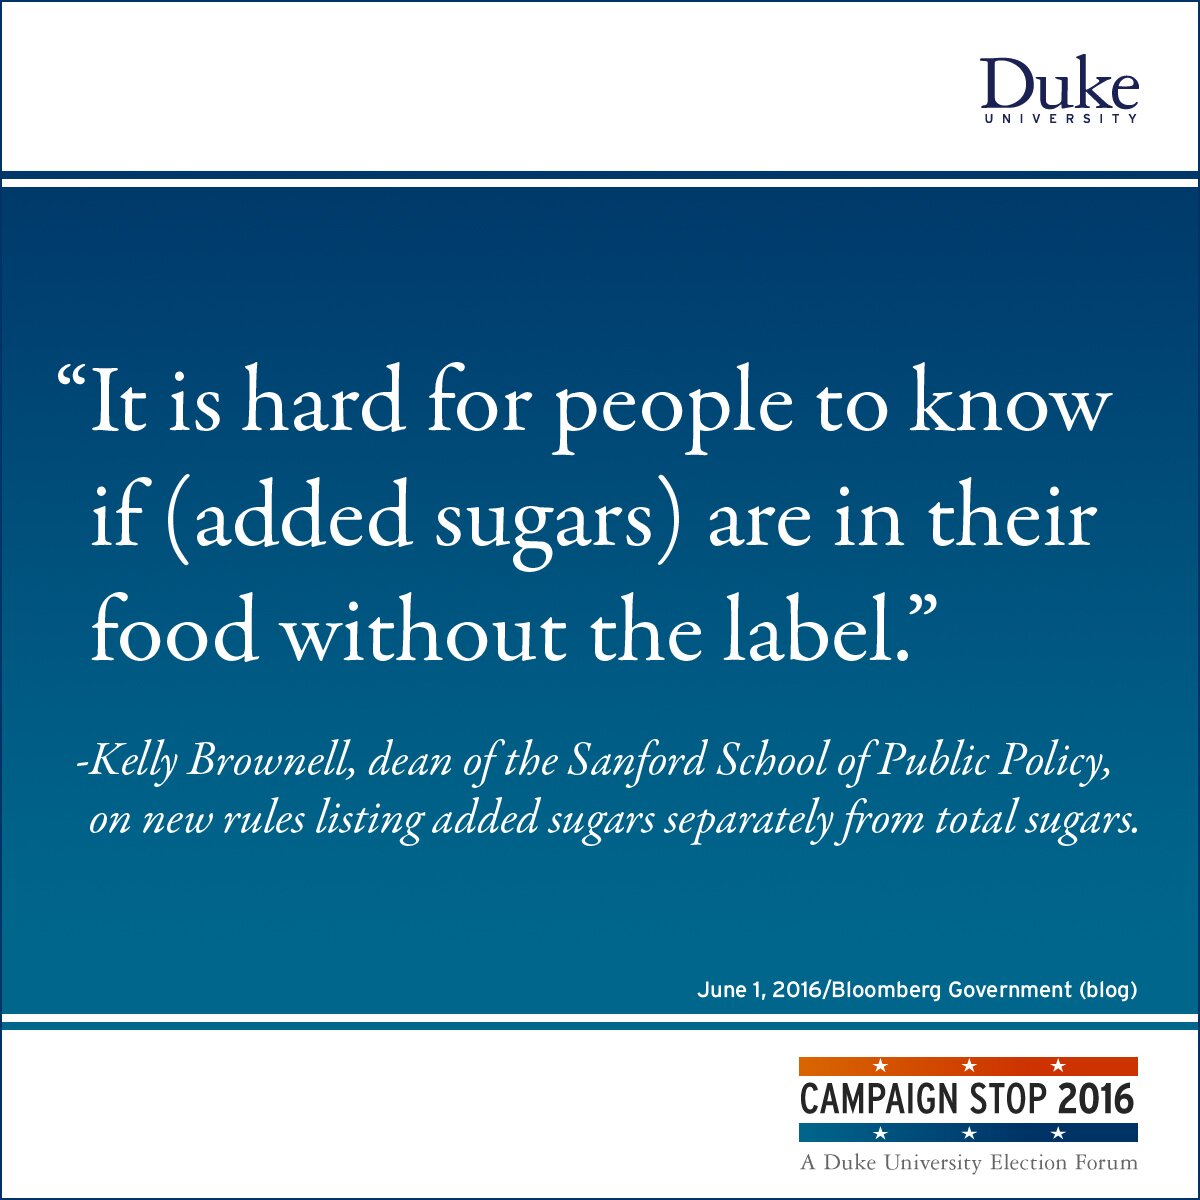 “It is hard for people to know if (added sugars) are in their food without the label.” -Kelly Brownell, dean of the Sanford School of Public Policy, on new rules listing added sugars separately from total sugars.